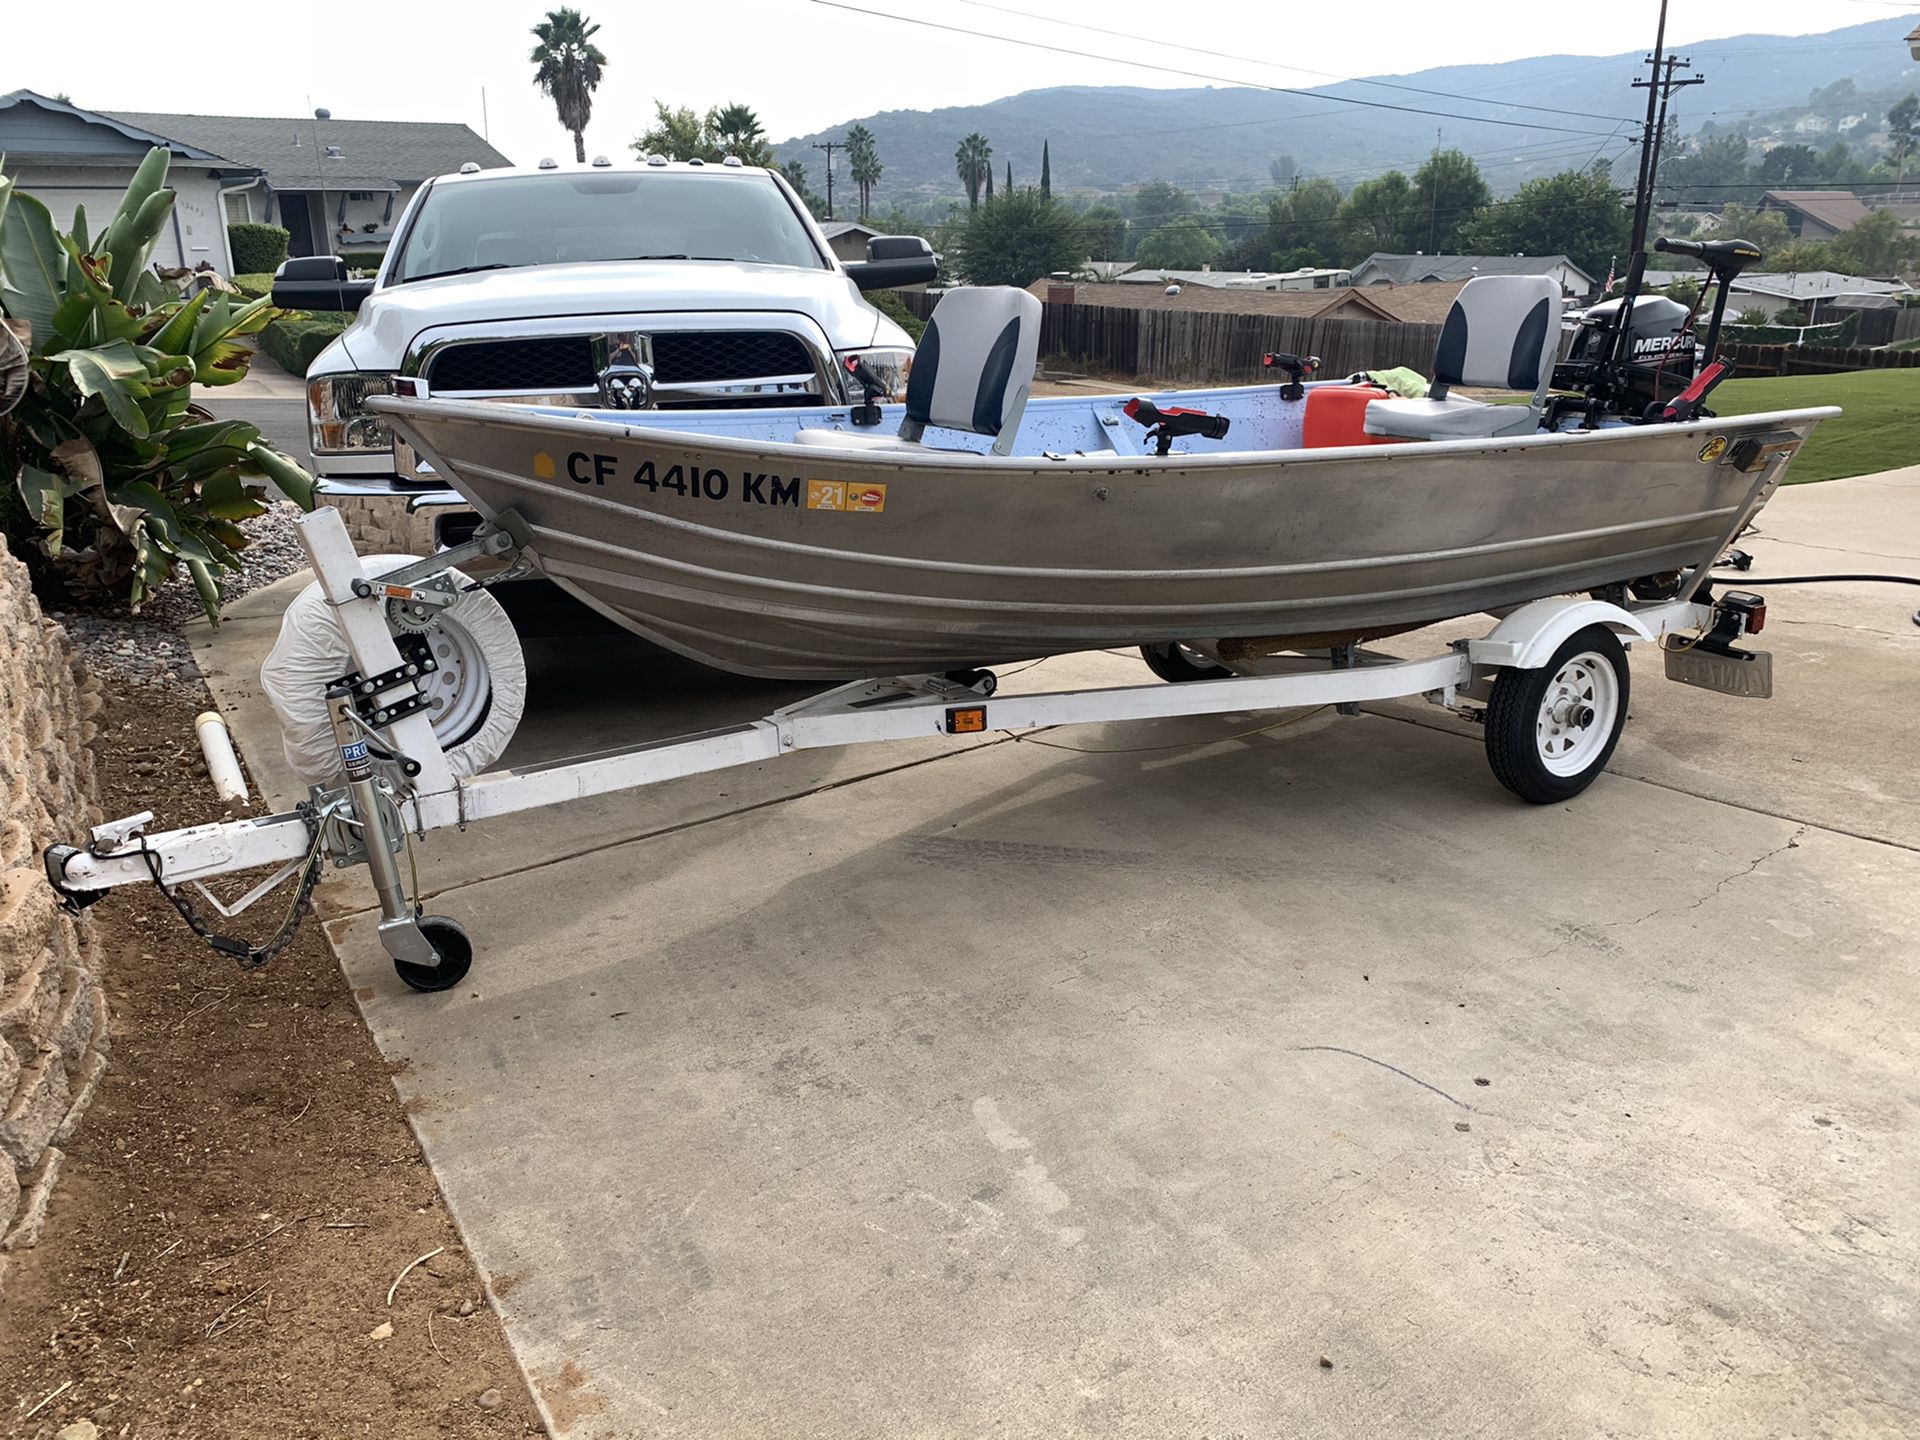 Klamath 12ft aluminum bass boat for Sale in Poway, CA - OfferUp